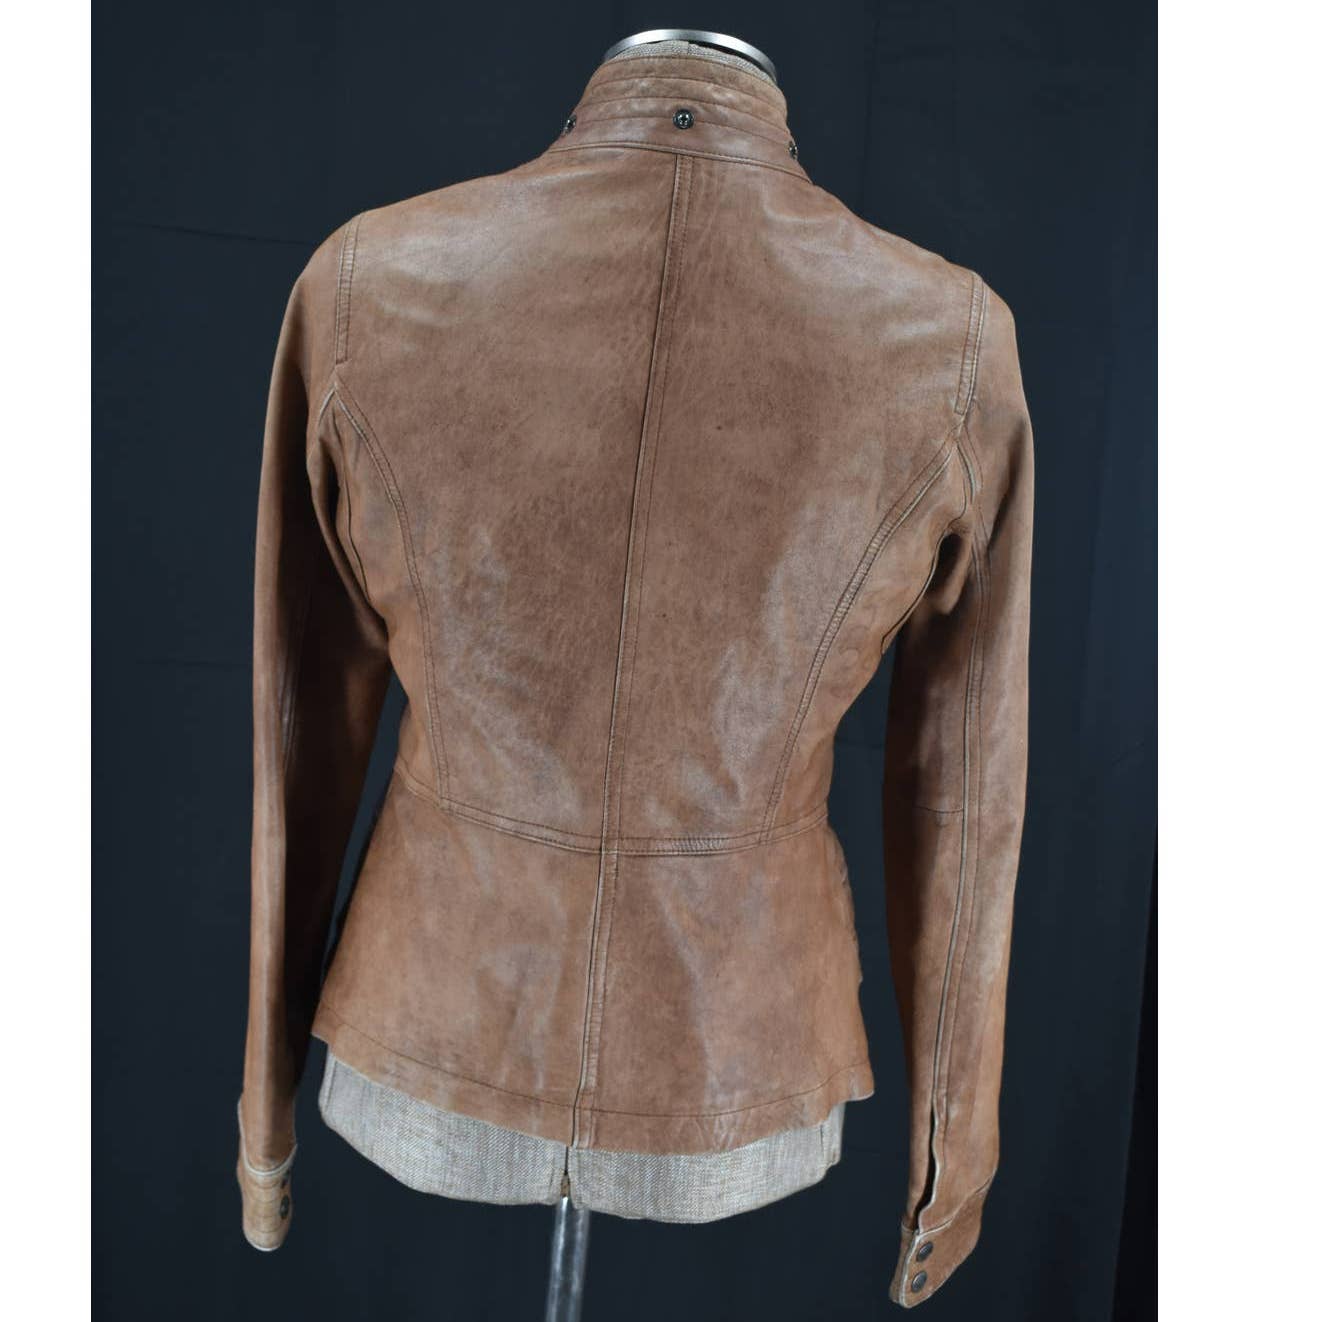 Vince Brown Lined Leather Jacket - S